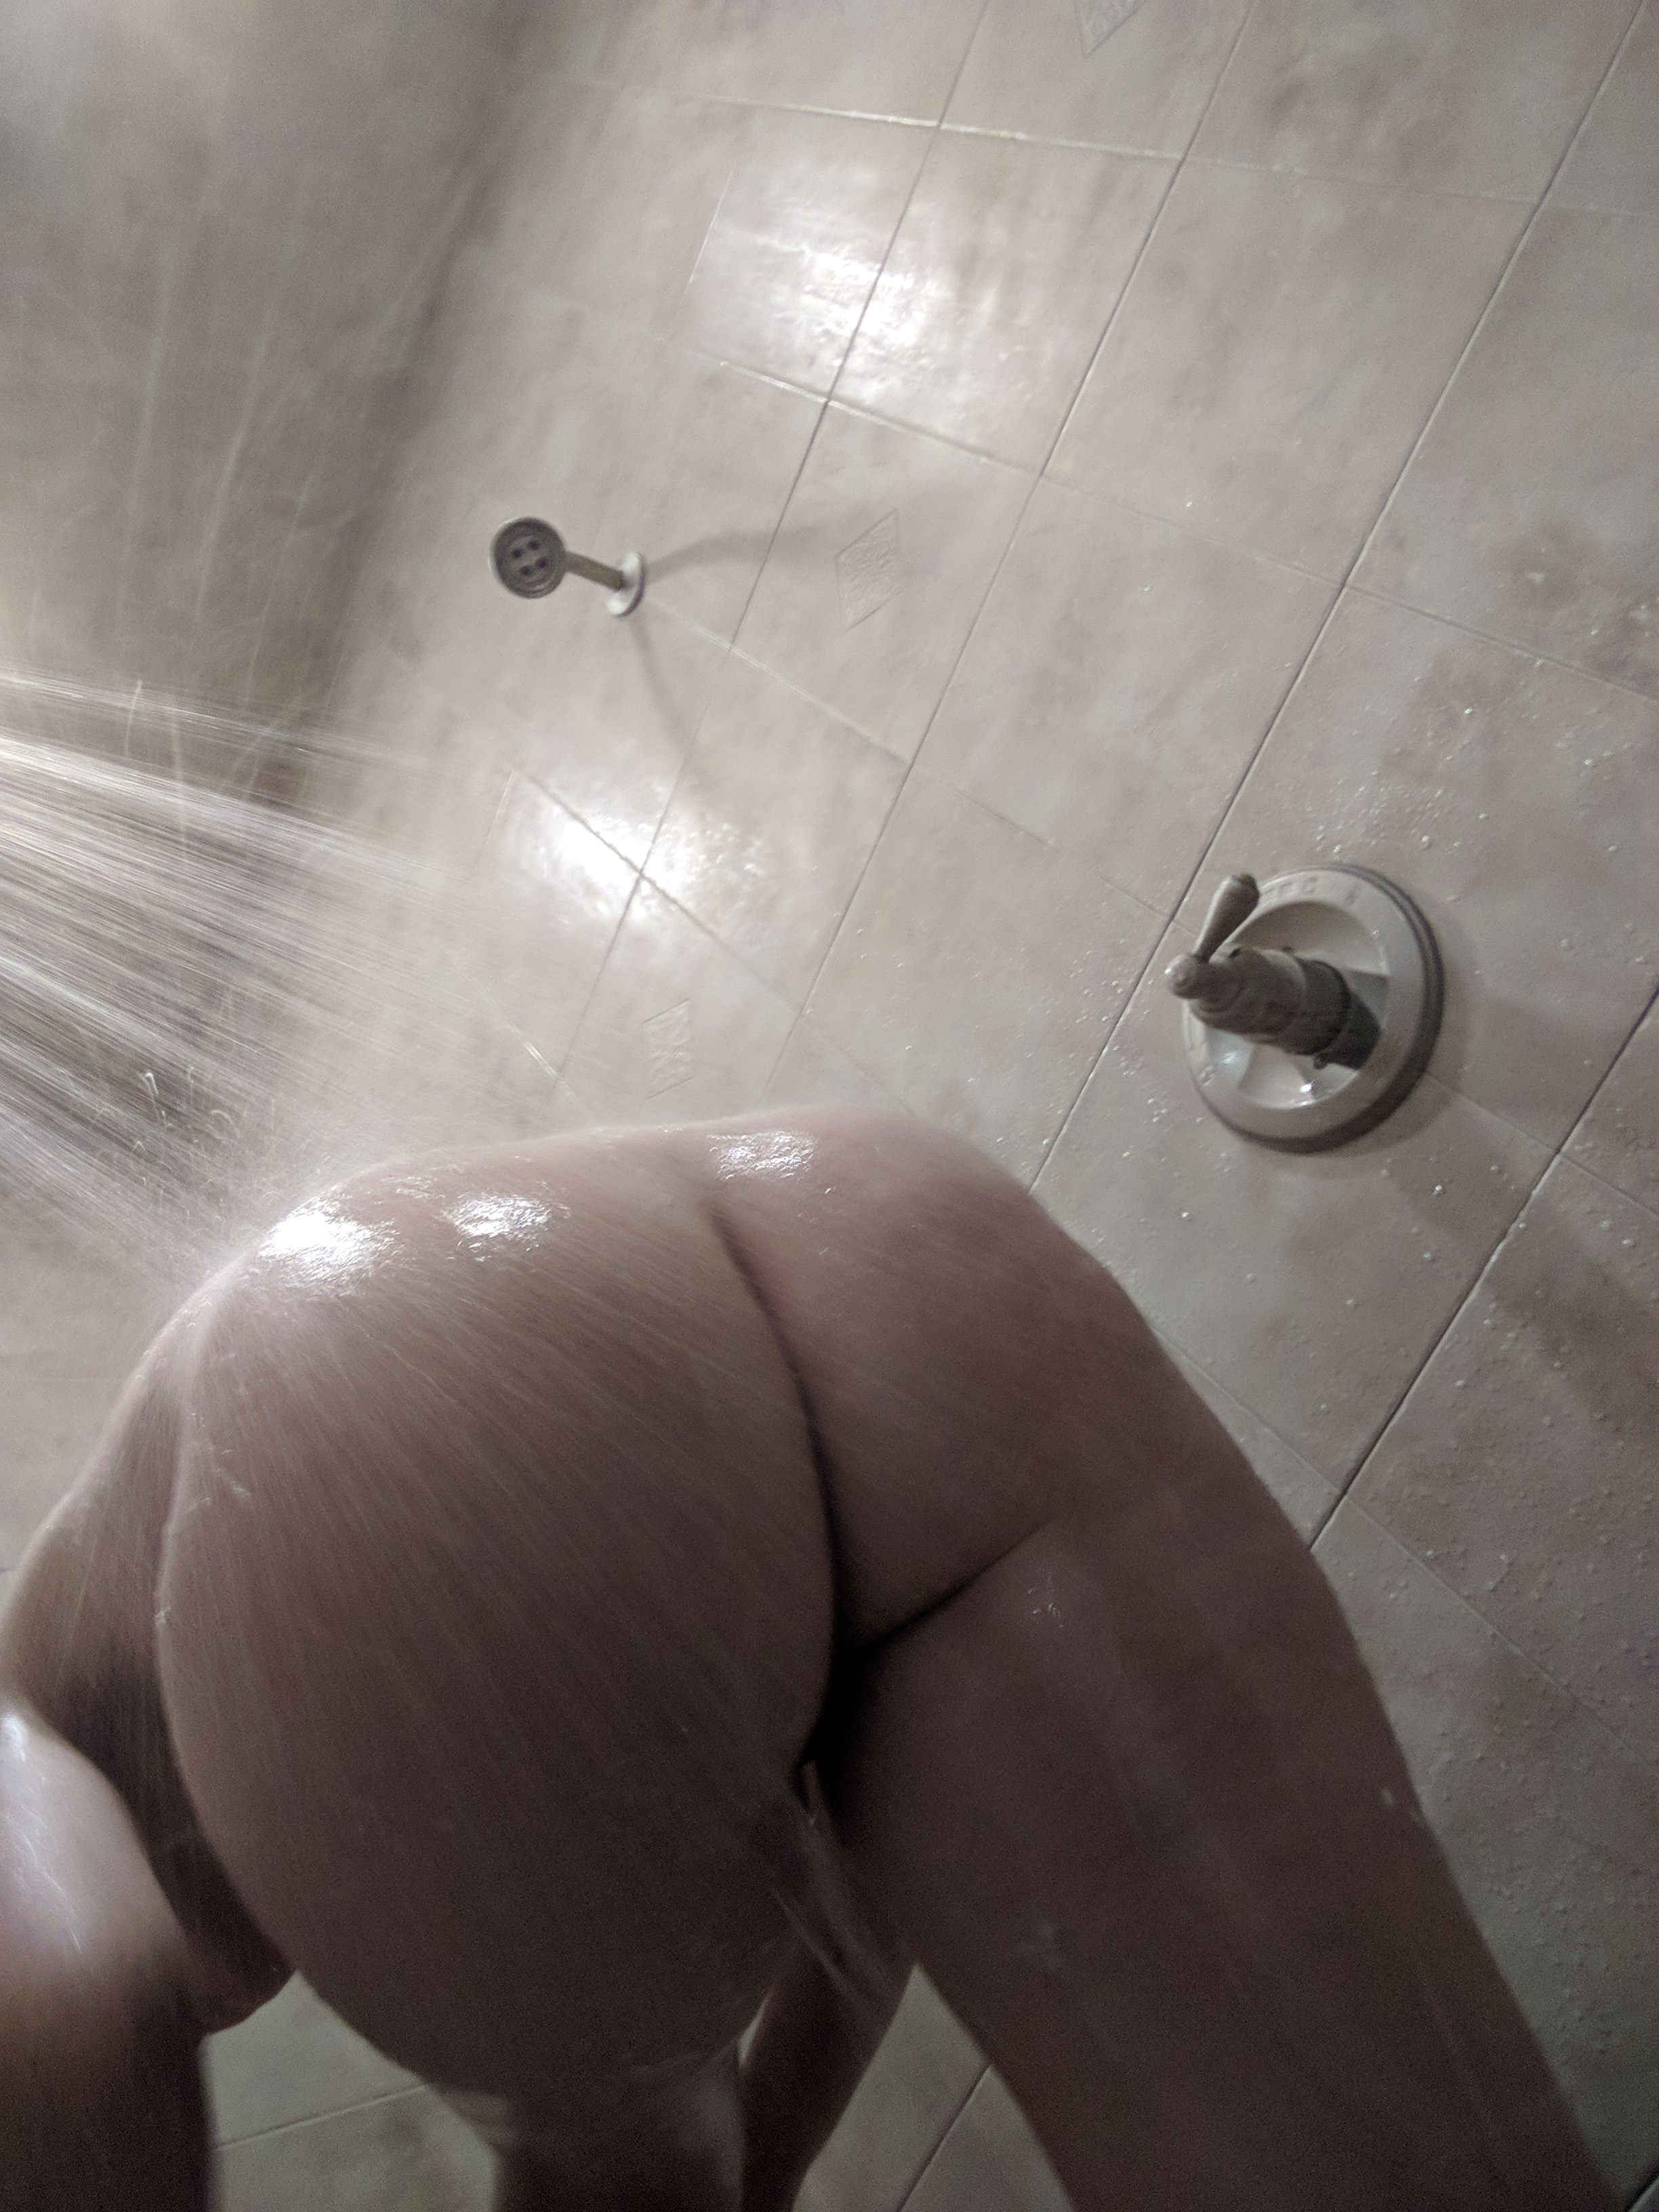 36 Y O Wi[f]ey Bending Over In The Shower To Shave All Those Hard To